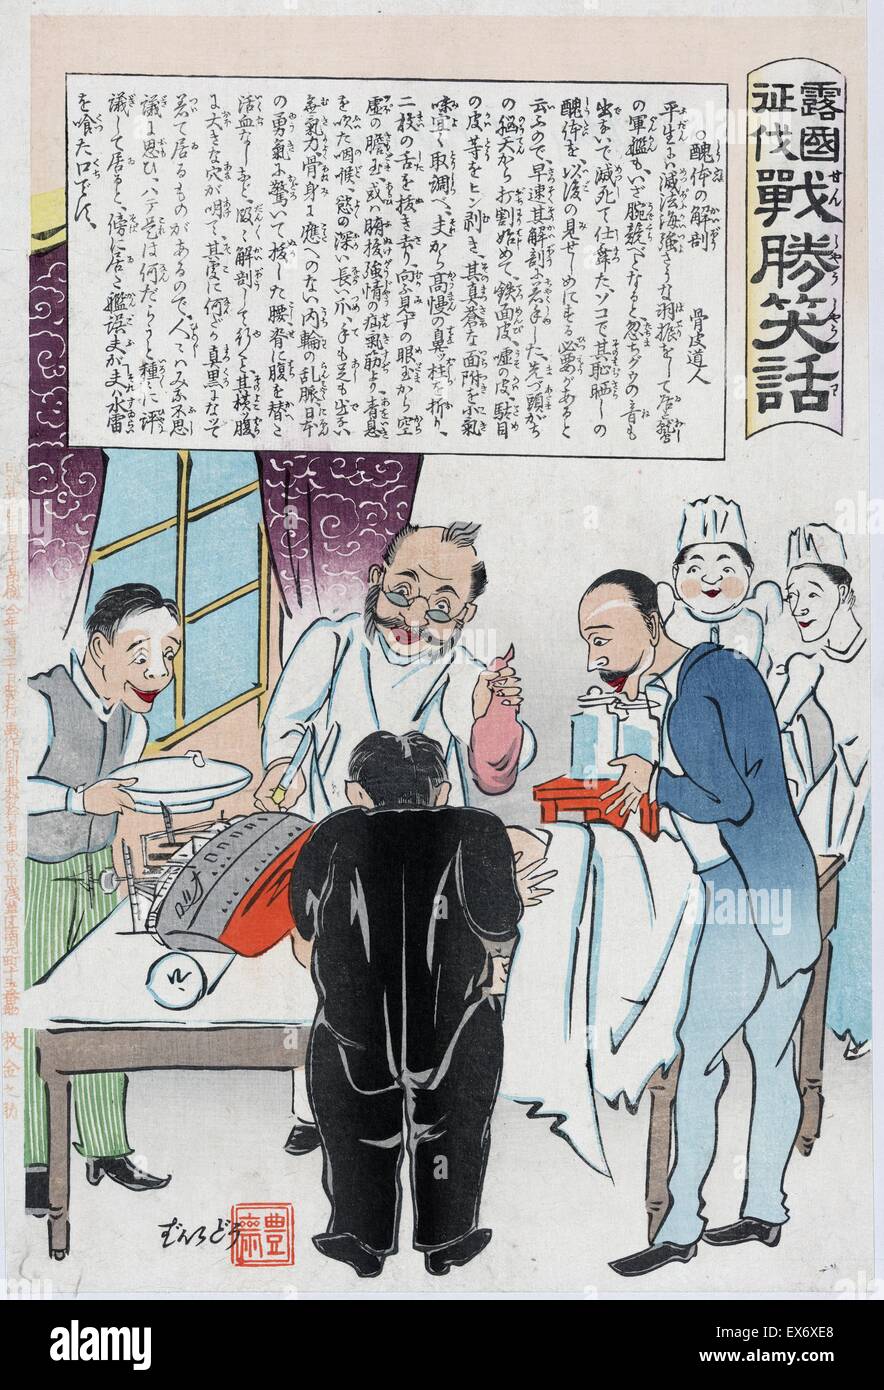 Human figure with Russian battleship for a head being operated on by Japanese surgeons. Artist, Kokunimasa Utagawa (1874-1944). From the series Rokoku seibatsu sensho shows - Defeat of Russia : tales of laughter attributed to Baido Bosai. Published 1904. Stock Photo